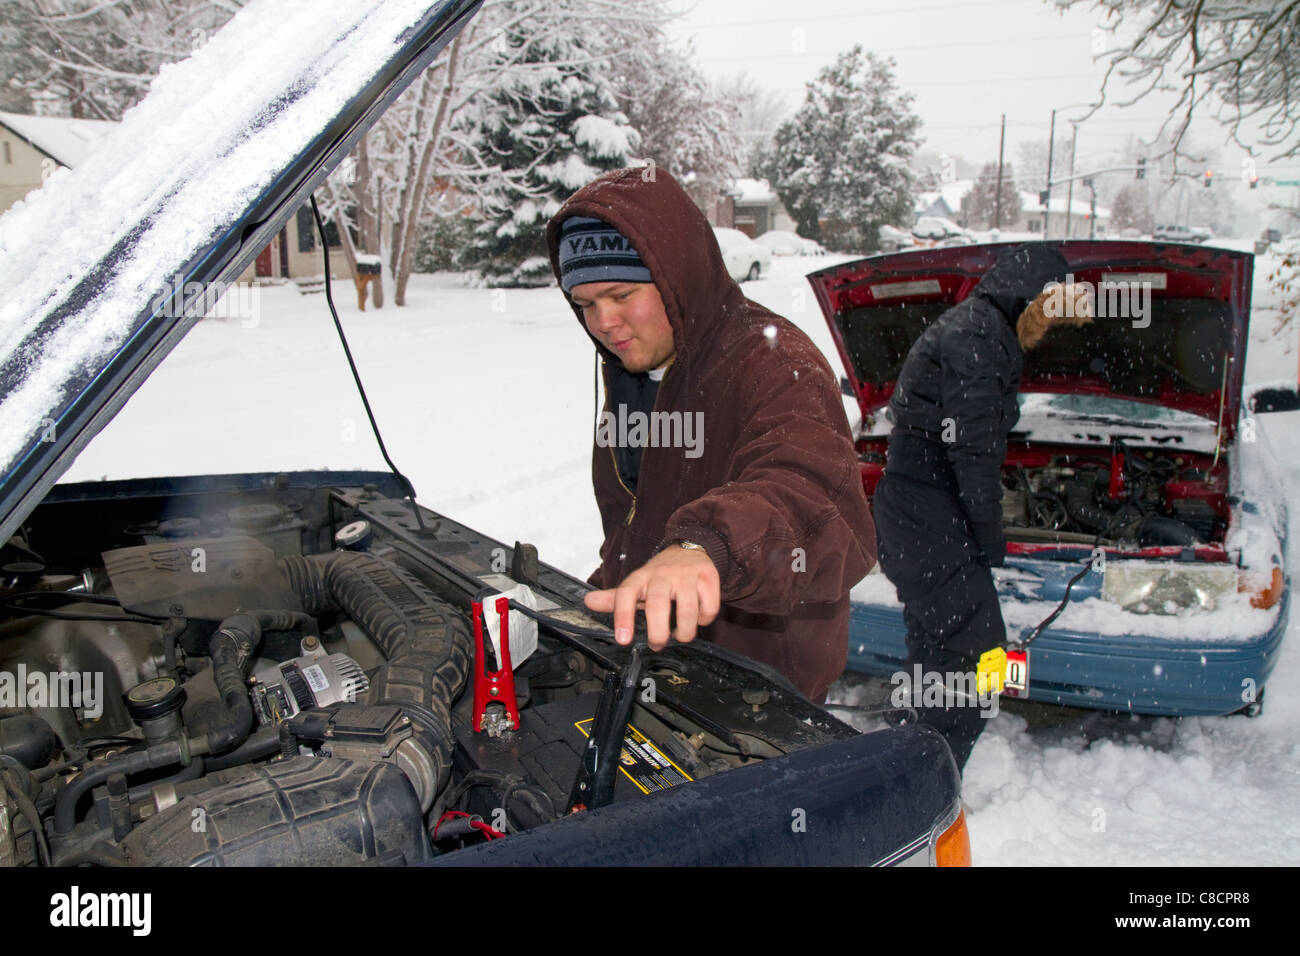 Jump starting a car in winter weather, Boise, Idaho, USA. Stock Photo